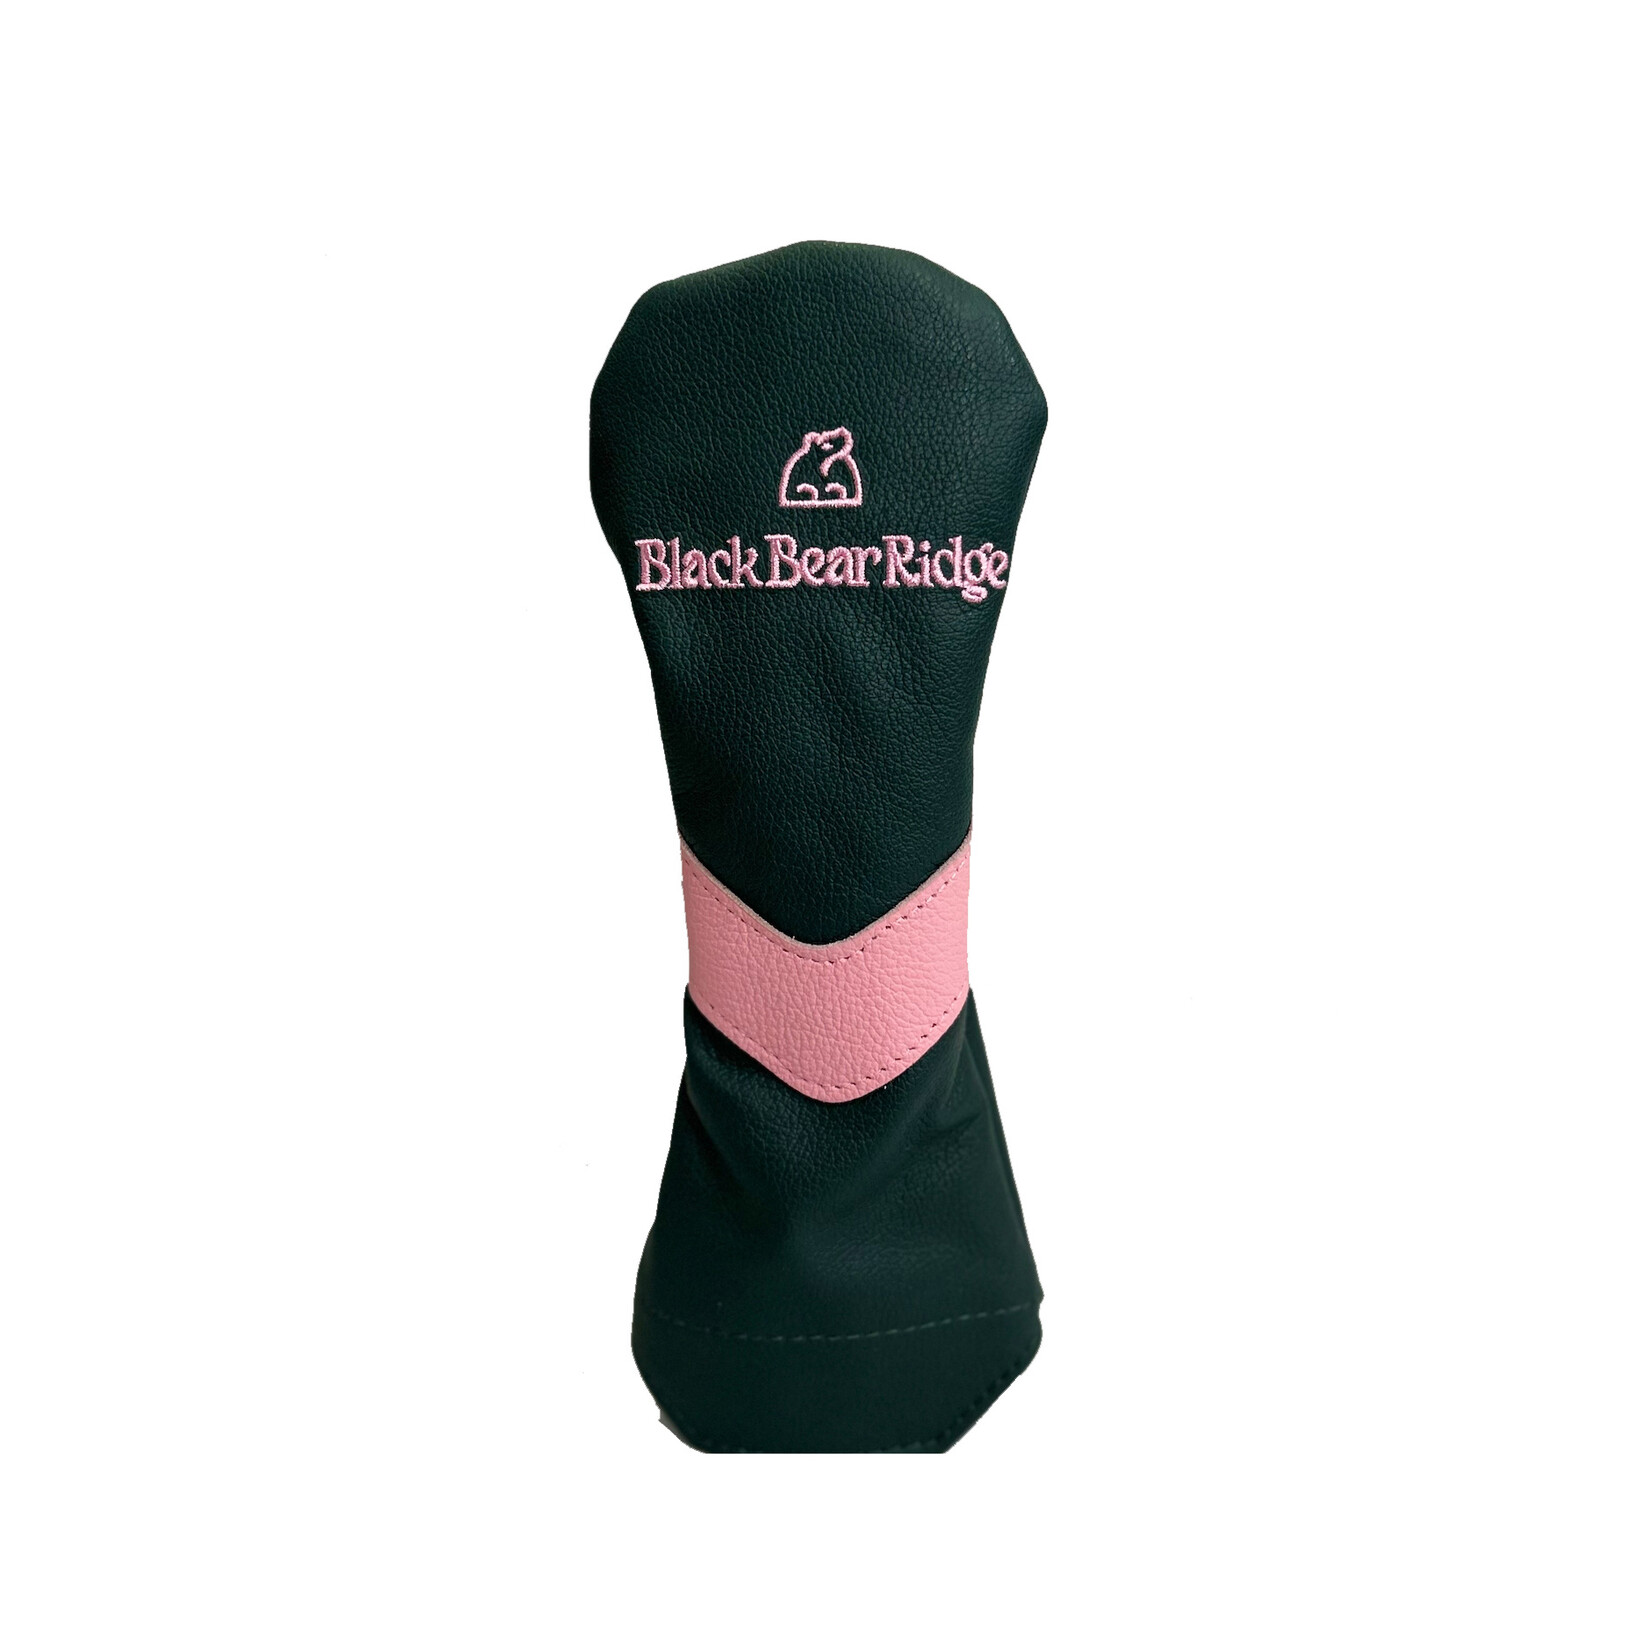 23- BBR Driver Headcover (Green/Pink)